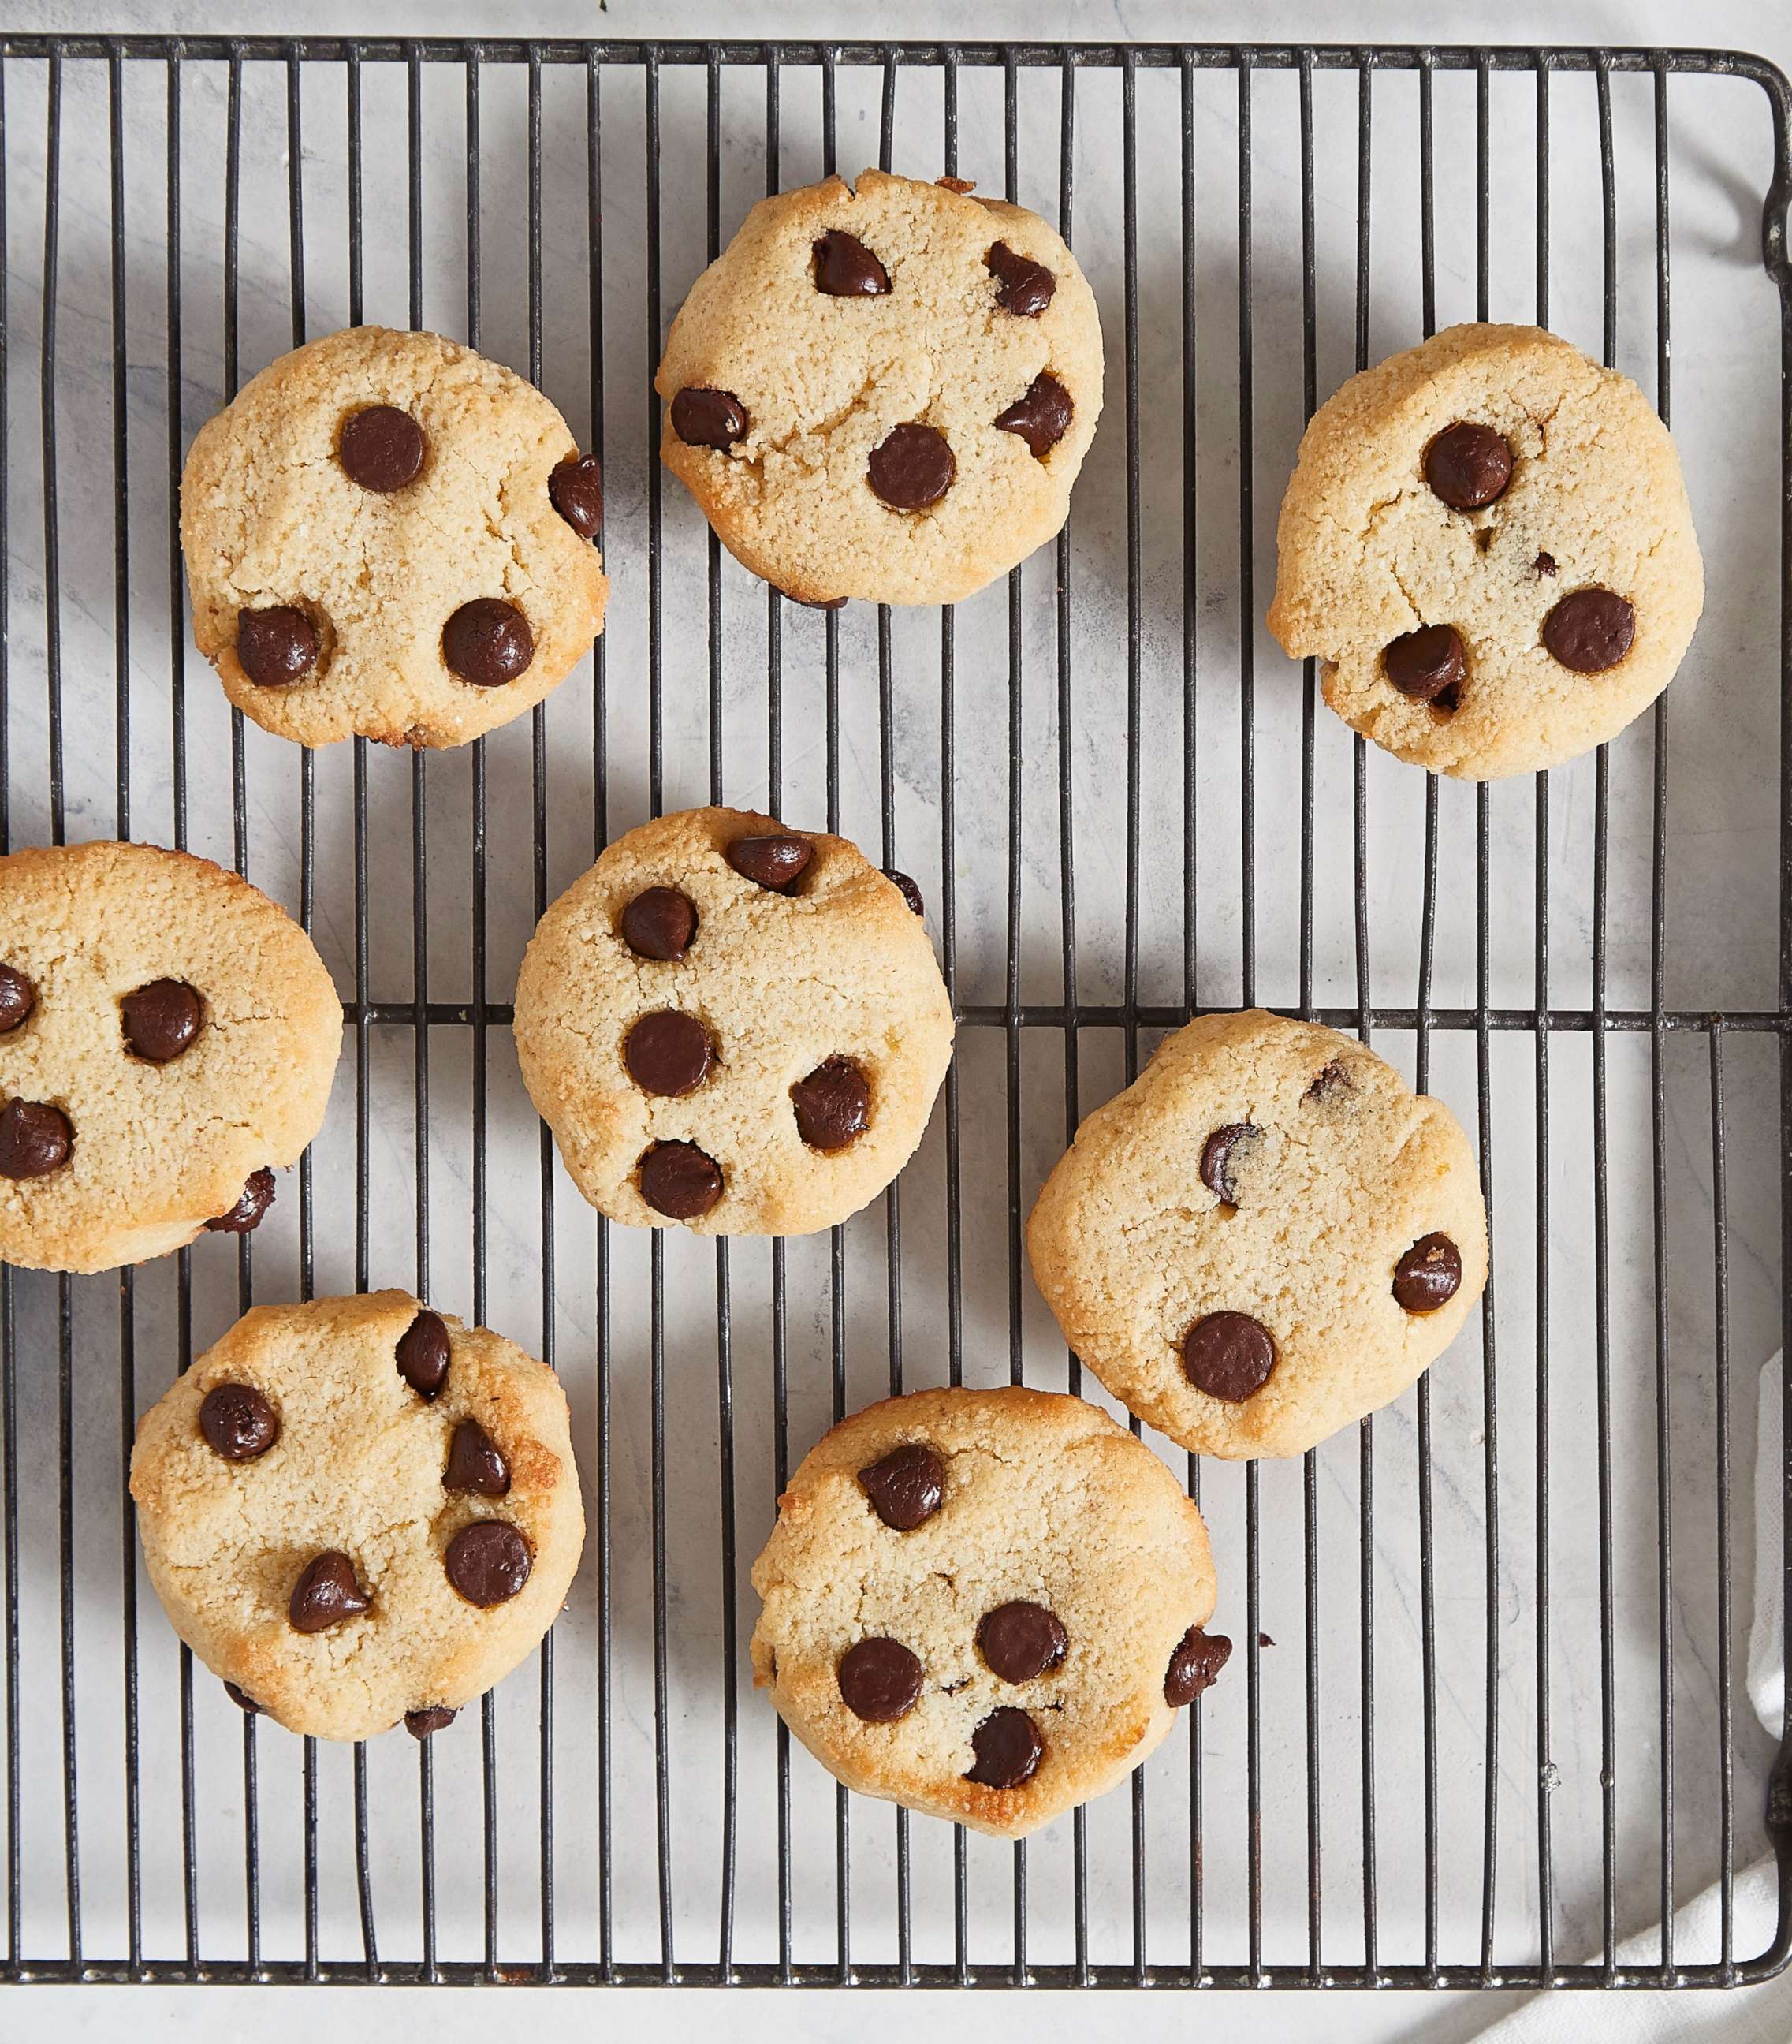 PHOTO: Chewy chocolate chip cookies by Jen Fisch of KetoIntheCity.com.